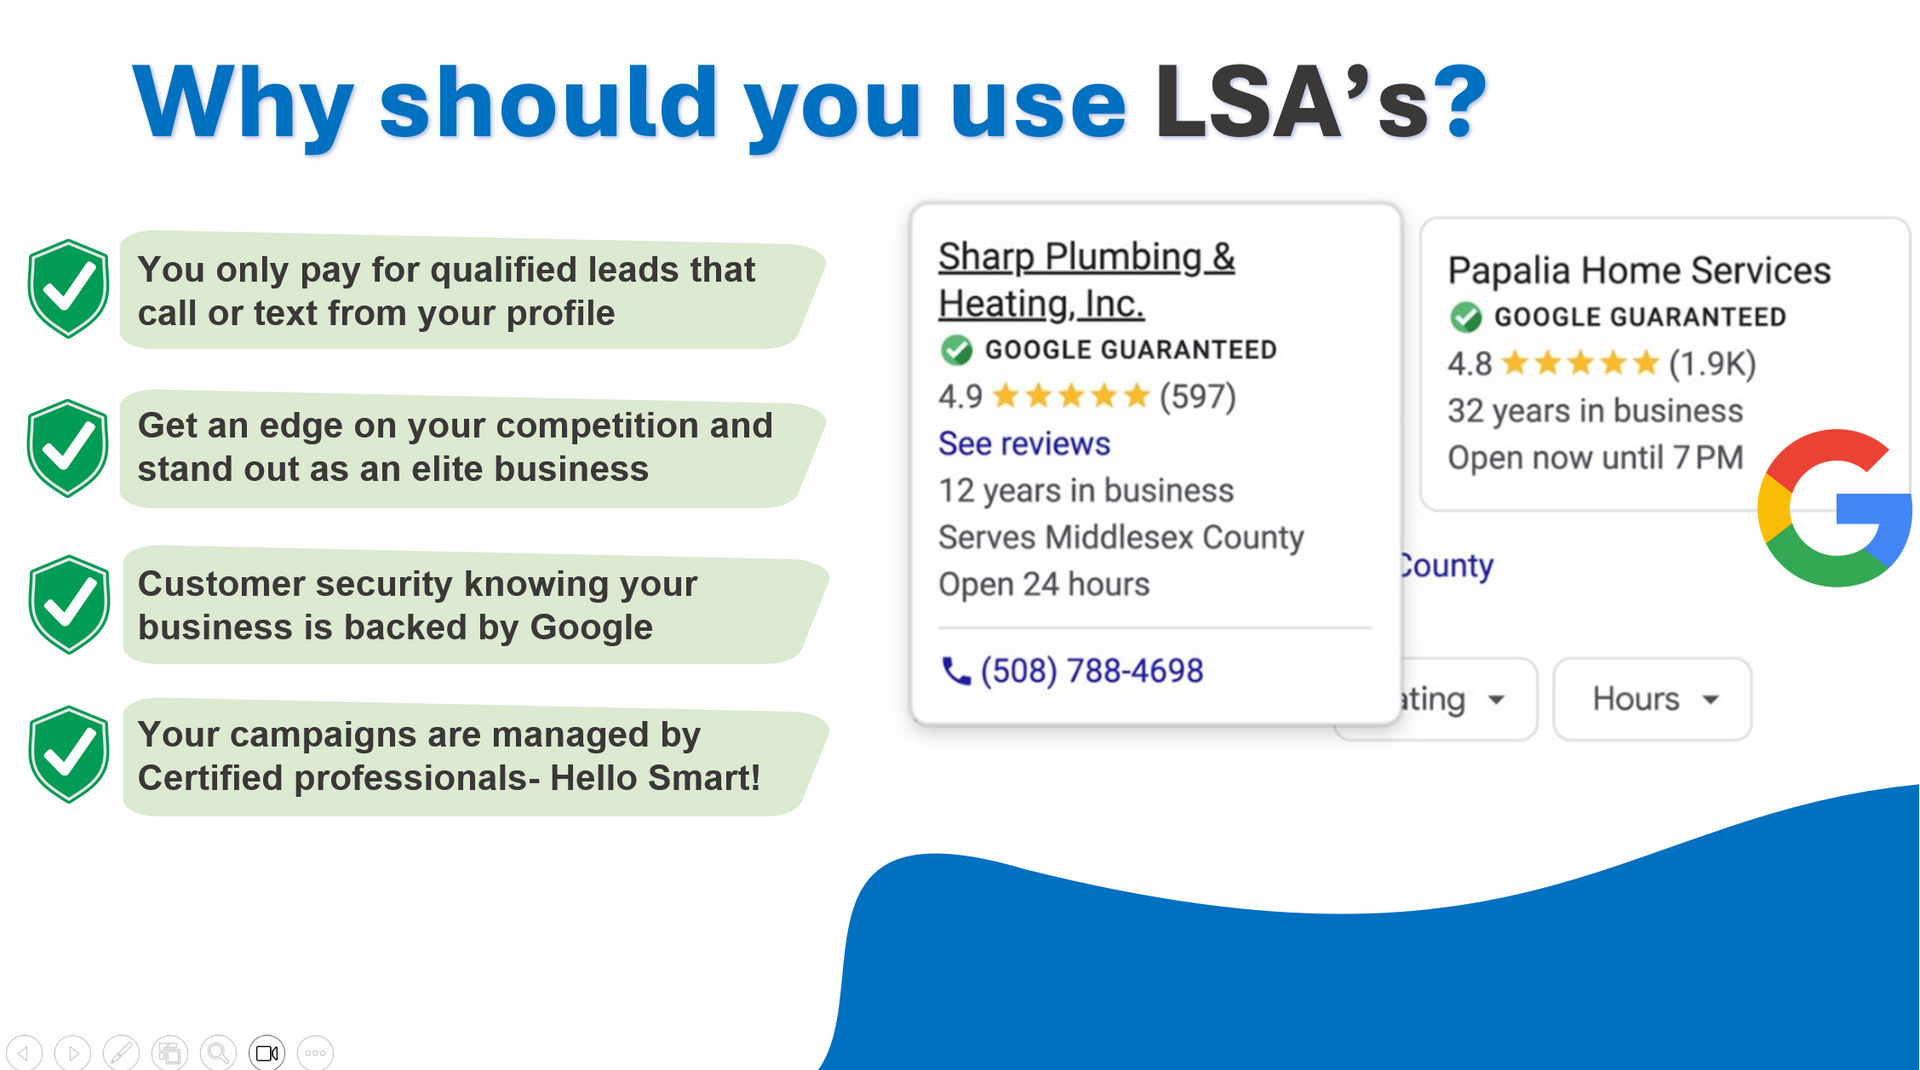 A graphic explaining why you should use lsa 's